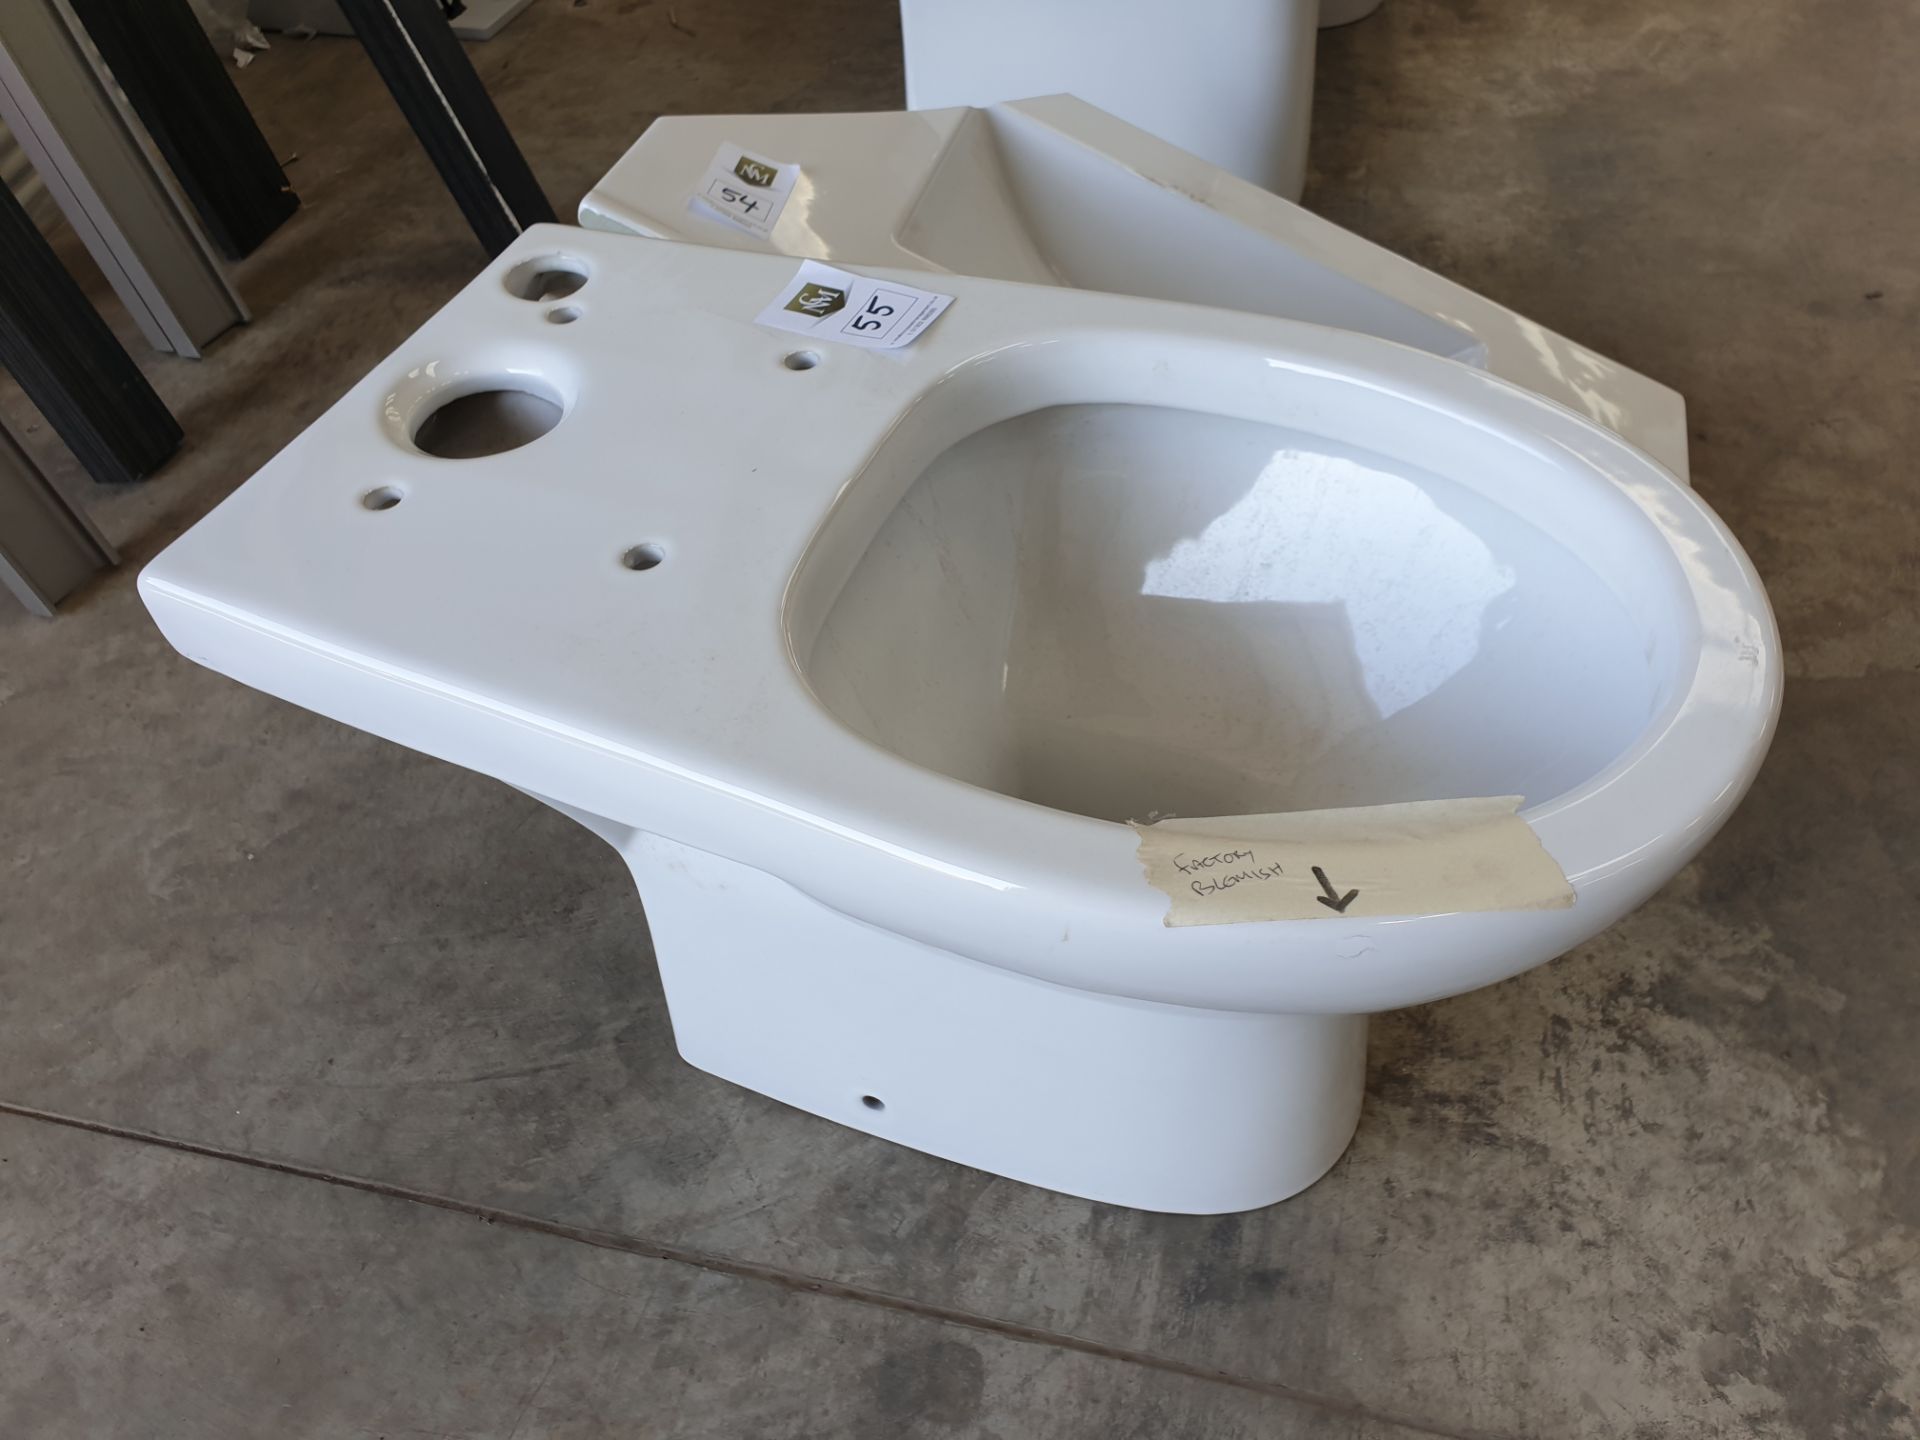 Toilet - Requires cistern